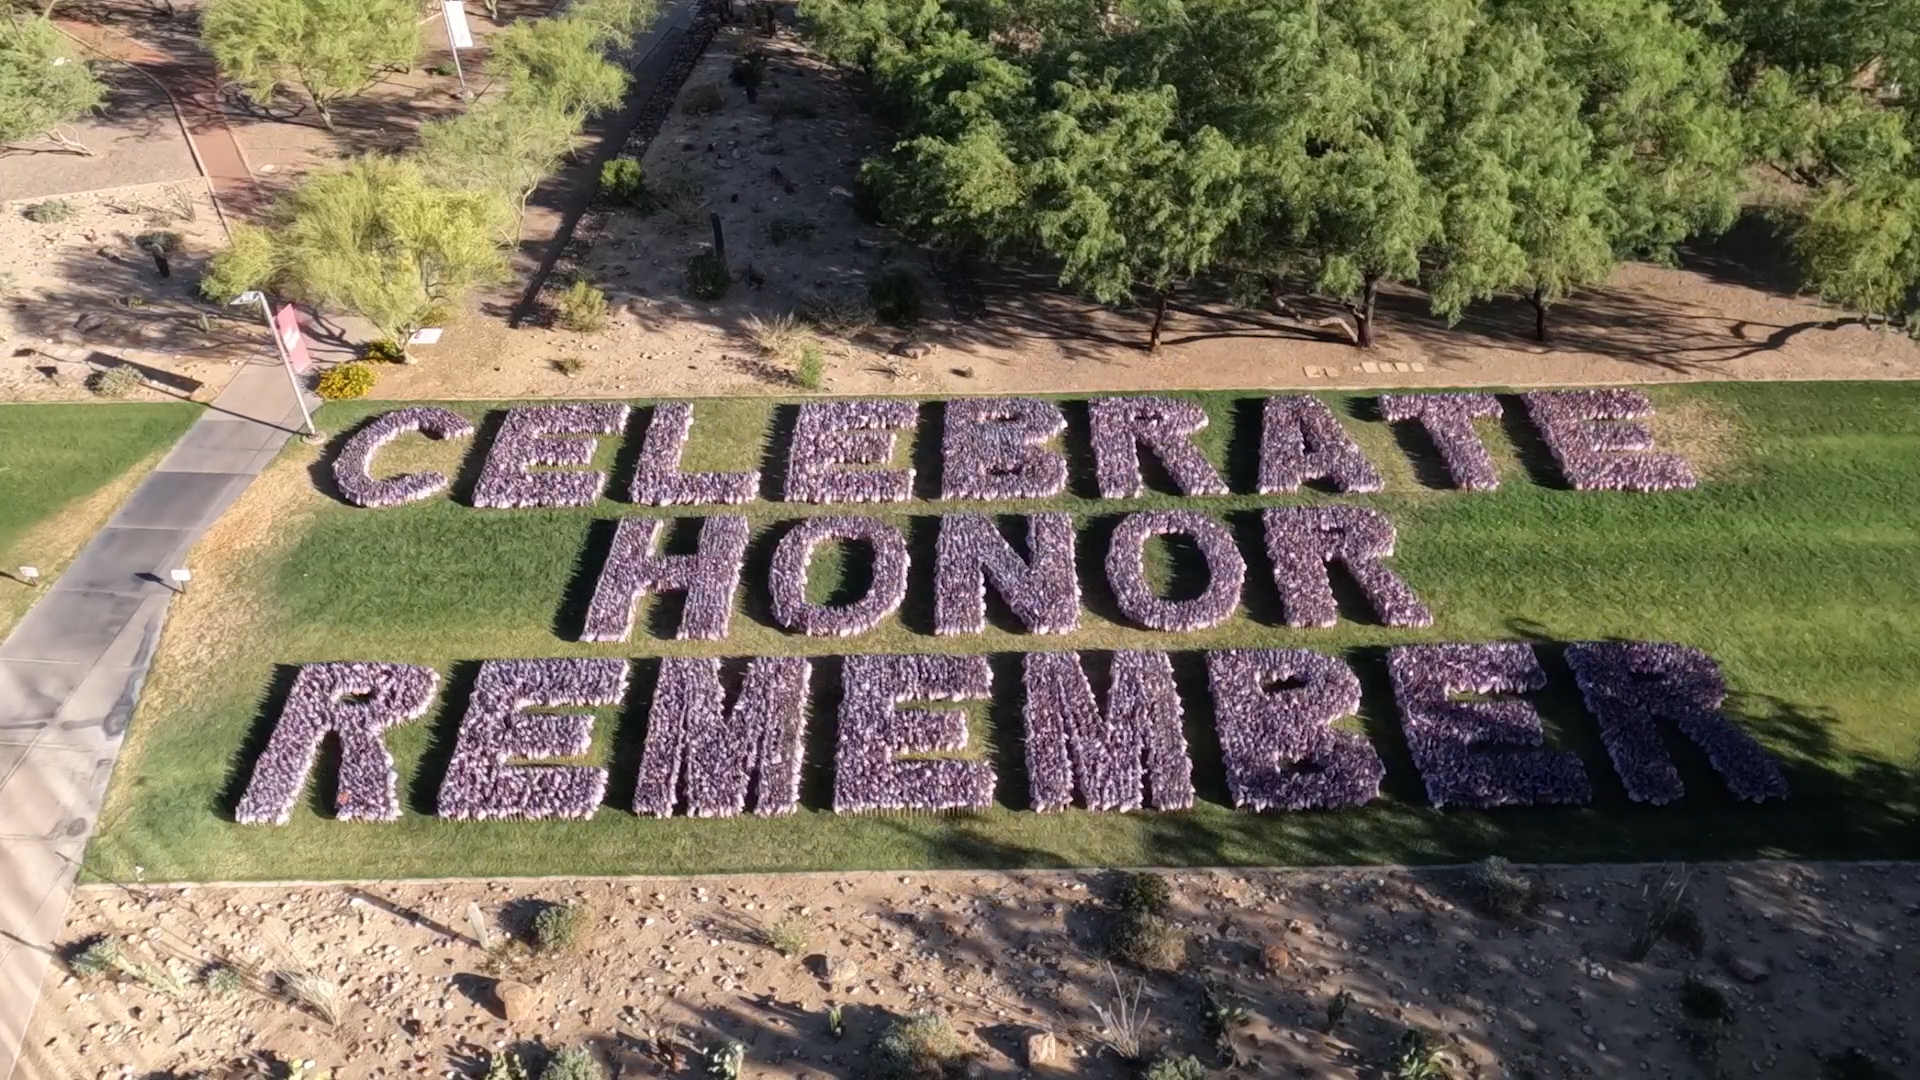 University of Phoenix held its annual Memorial Day flag-planting event on May 23, 2023. In this time lapse video, volunteers plant more than 10,000 flags spelling out, “Celebrate, Honor, Remember.”